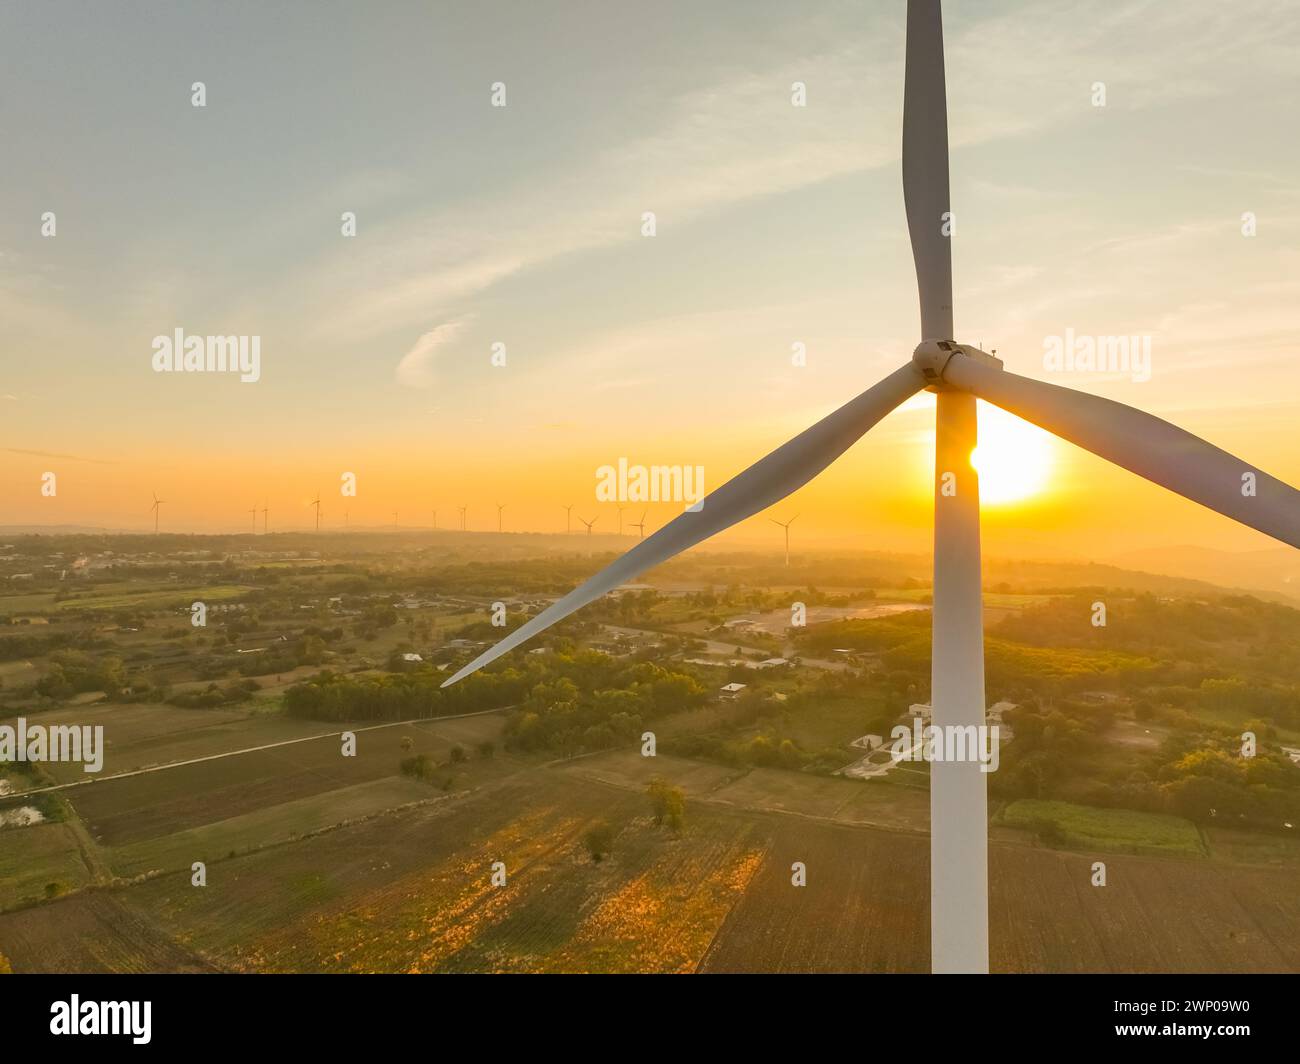 Wind farm field and sunset sky. Wind power. Sustainable, renewable energy. Wind turbines generate electricity. Sustainable development. Green tech Stock Photo